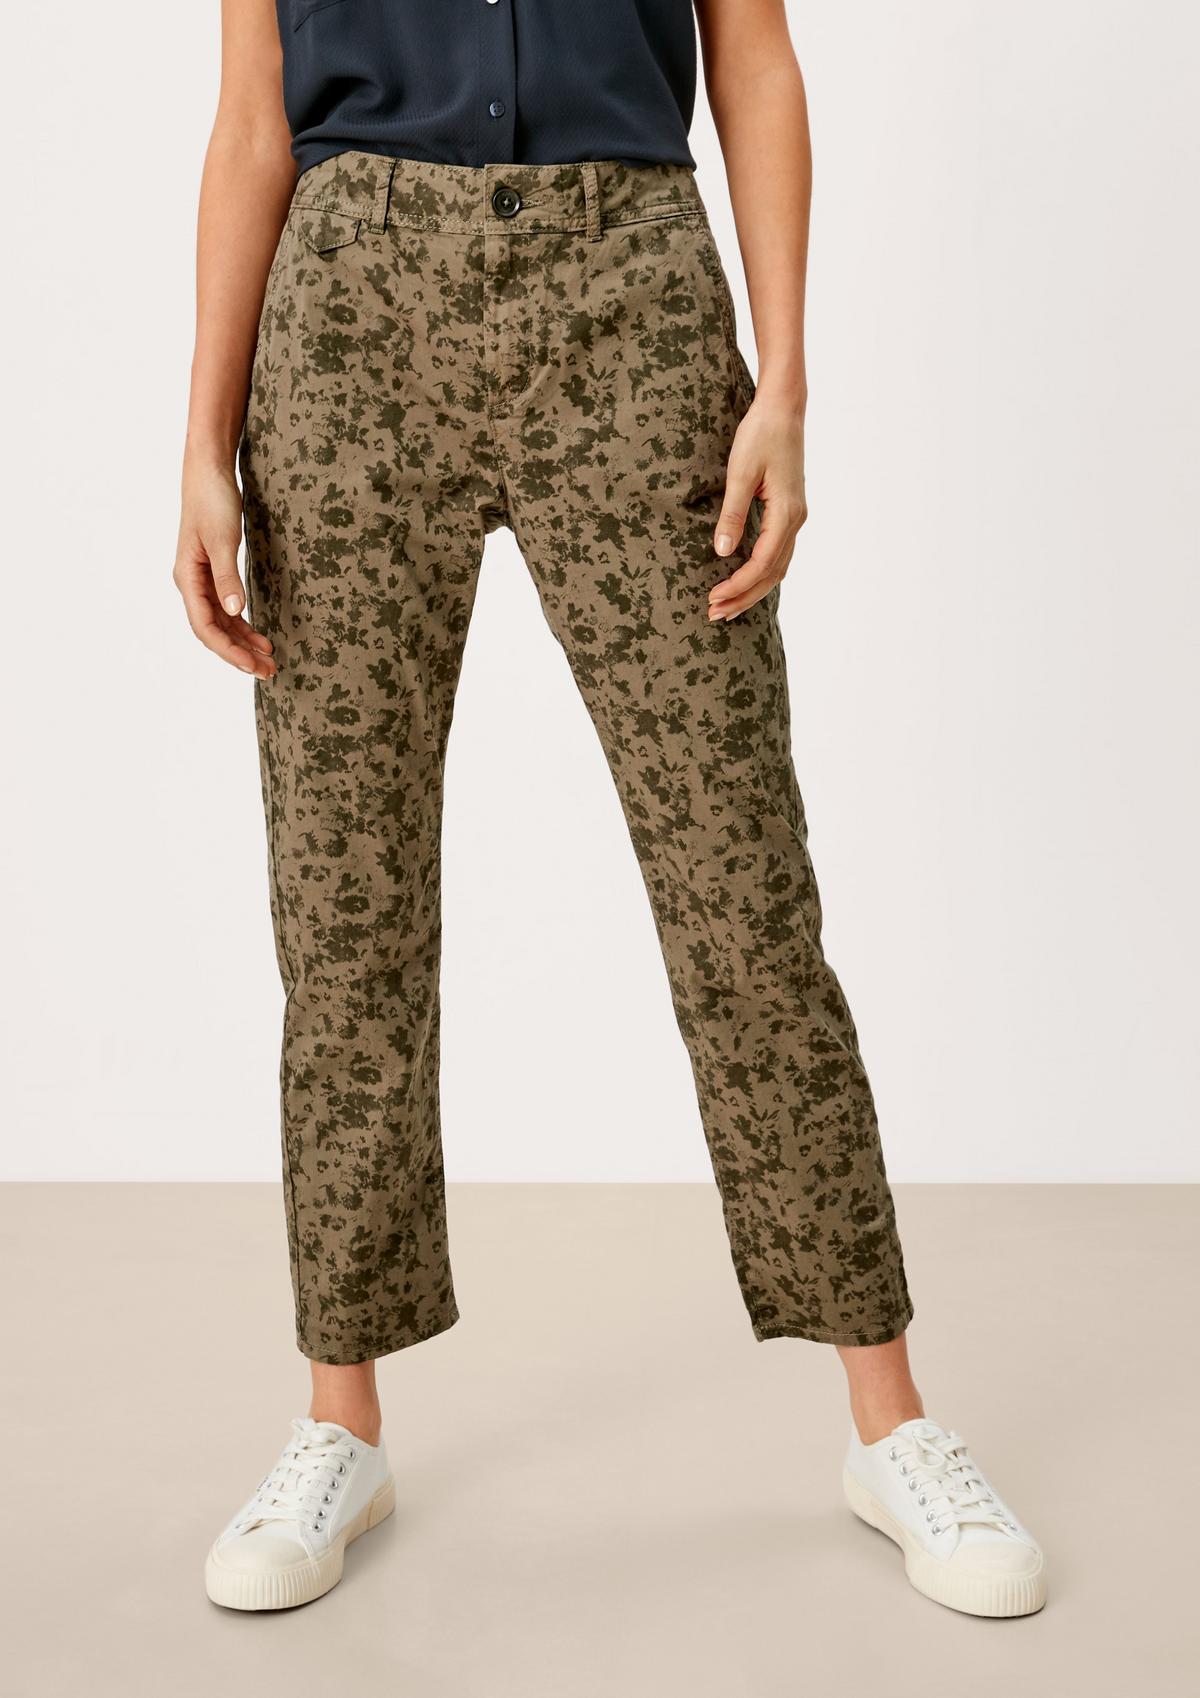 s.Oliver Comfort chinos: trousers with a printed pattern